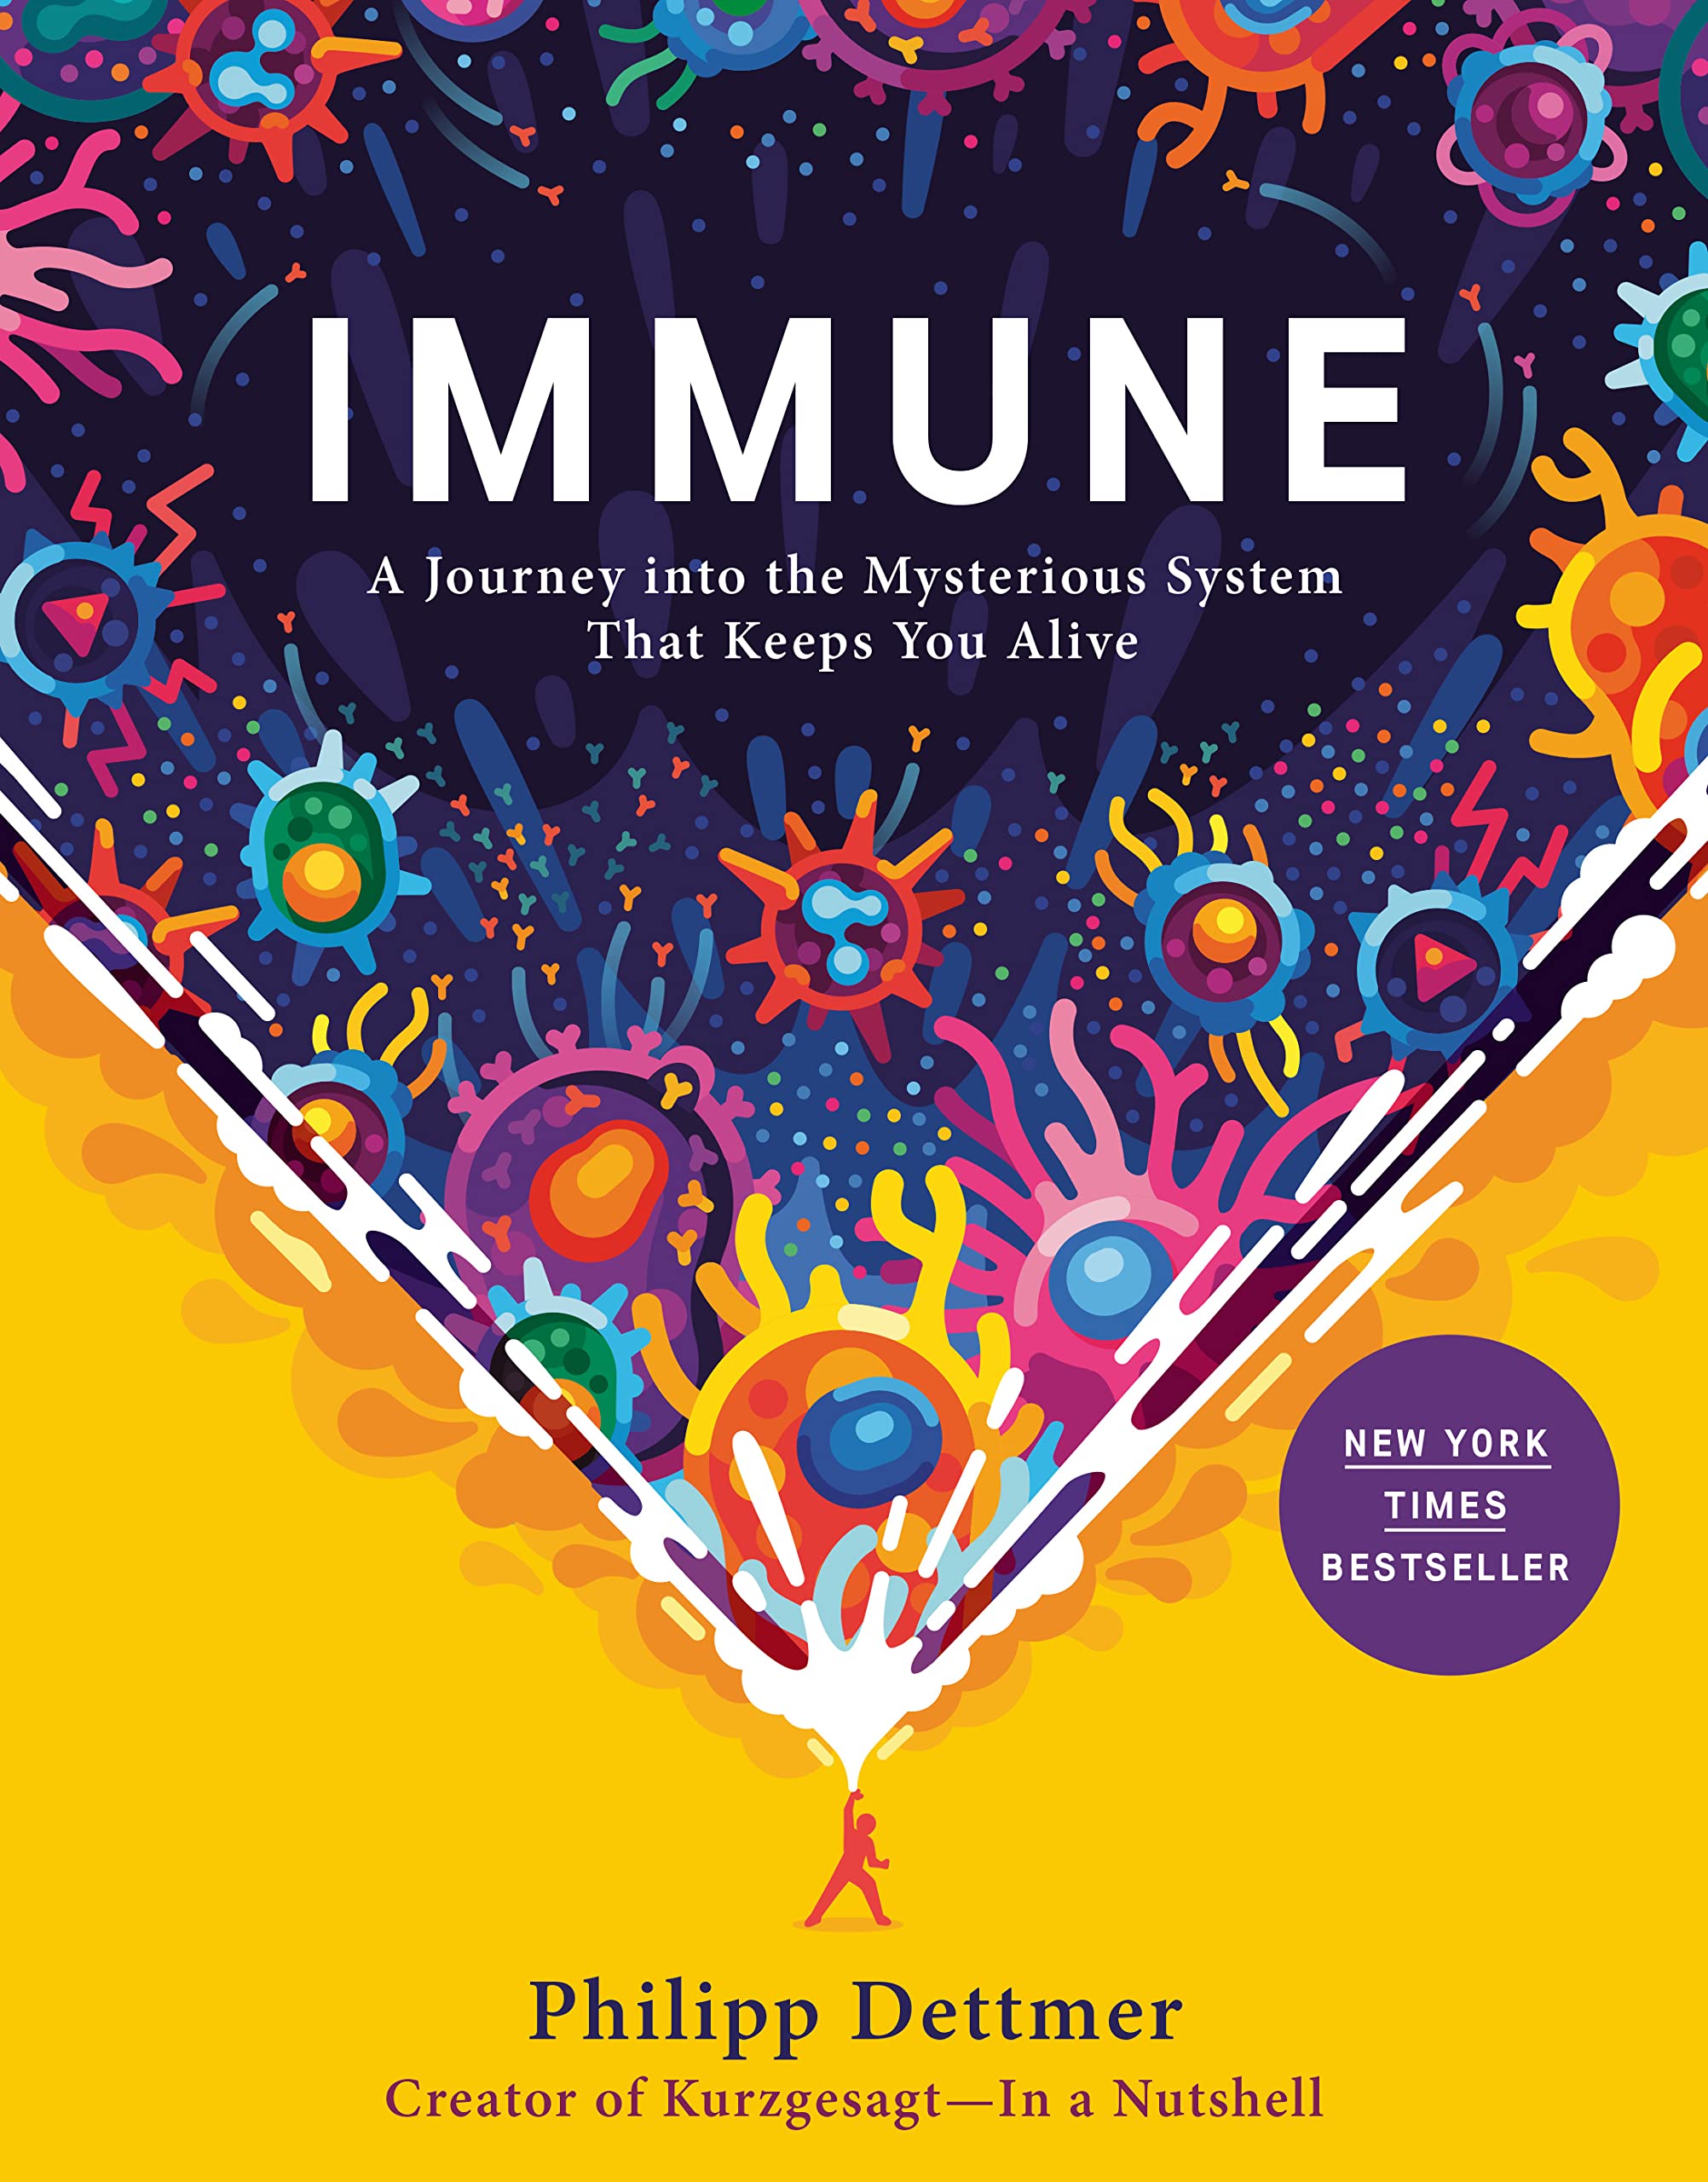 Immune: A Journey into the Mysterious System That Keeps You Alive (eBook) by Philipp Dettmer $2.99